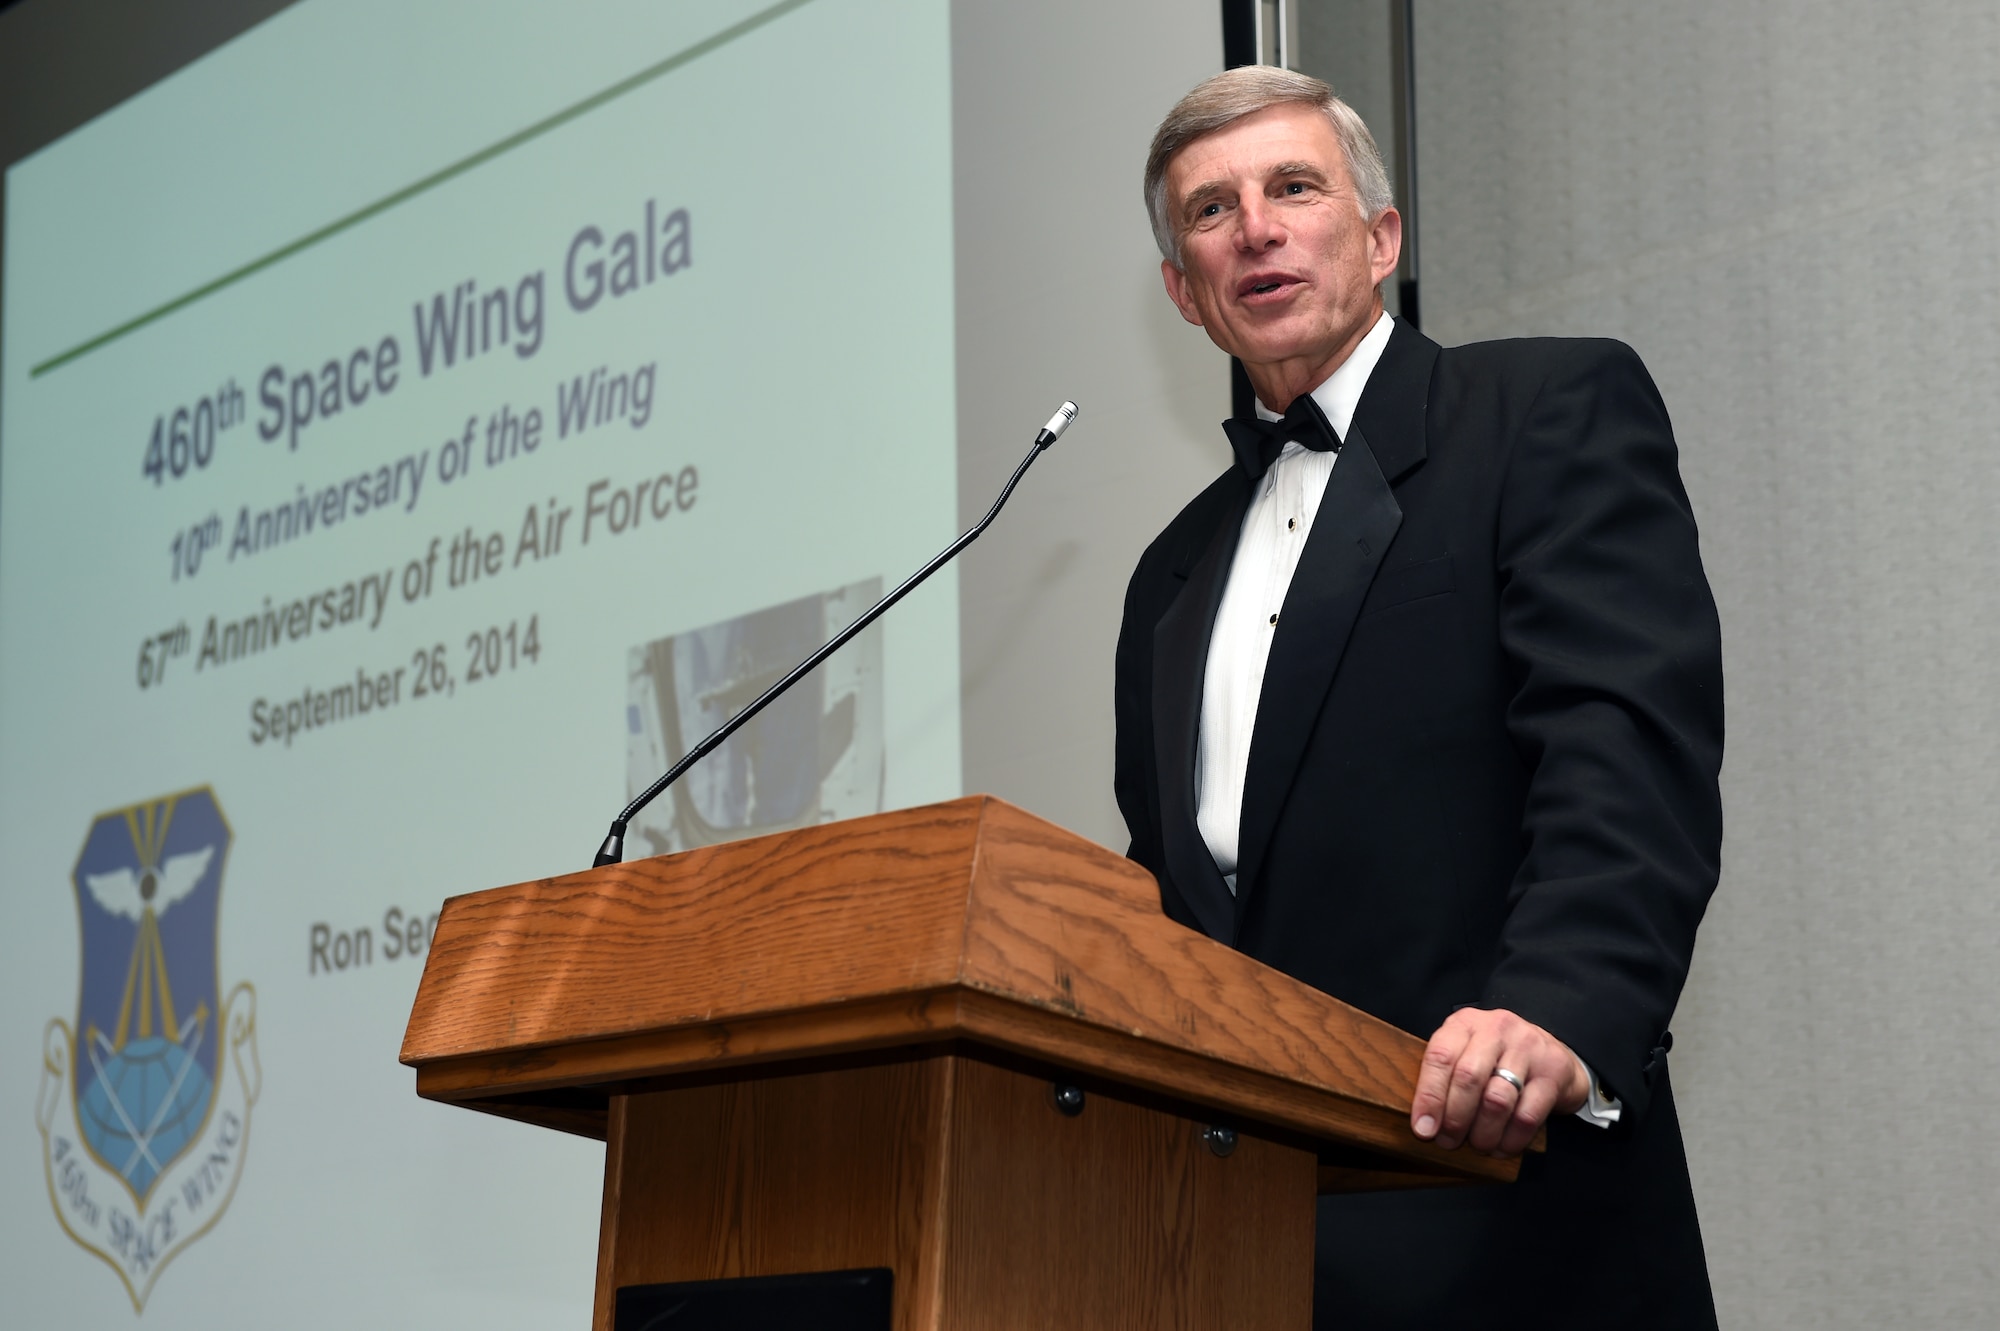 Retired Maj. Gen. Ronald M. Sega, astronaut and former undersecretary of the Air Force, speaks during the Air Force Ball and 460th Space Wing 10th anniversary celebration Sept. 27, 2014, at the Grand Hyatt Hotel in Denver. Every year, the Air Force celebrates its birthday with a formal military ball and festivities many people remember for a lifetime. Buckley Air Force Base did their part to wish the Air Force and the 460th SW a happy birthday with dinner, a guest speaker and a nighttime celebration. (U.S. Air Force photo by Airman Emily E. Amyotte/Released)